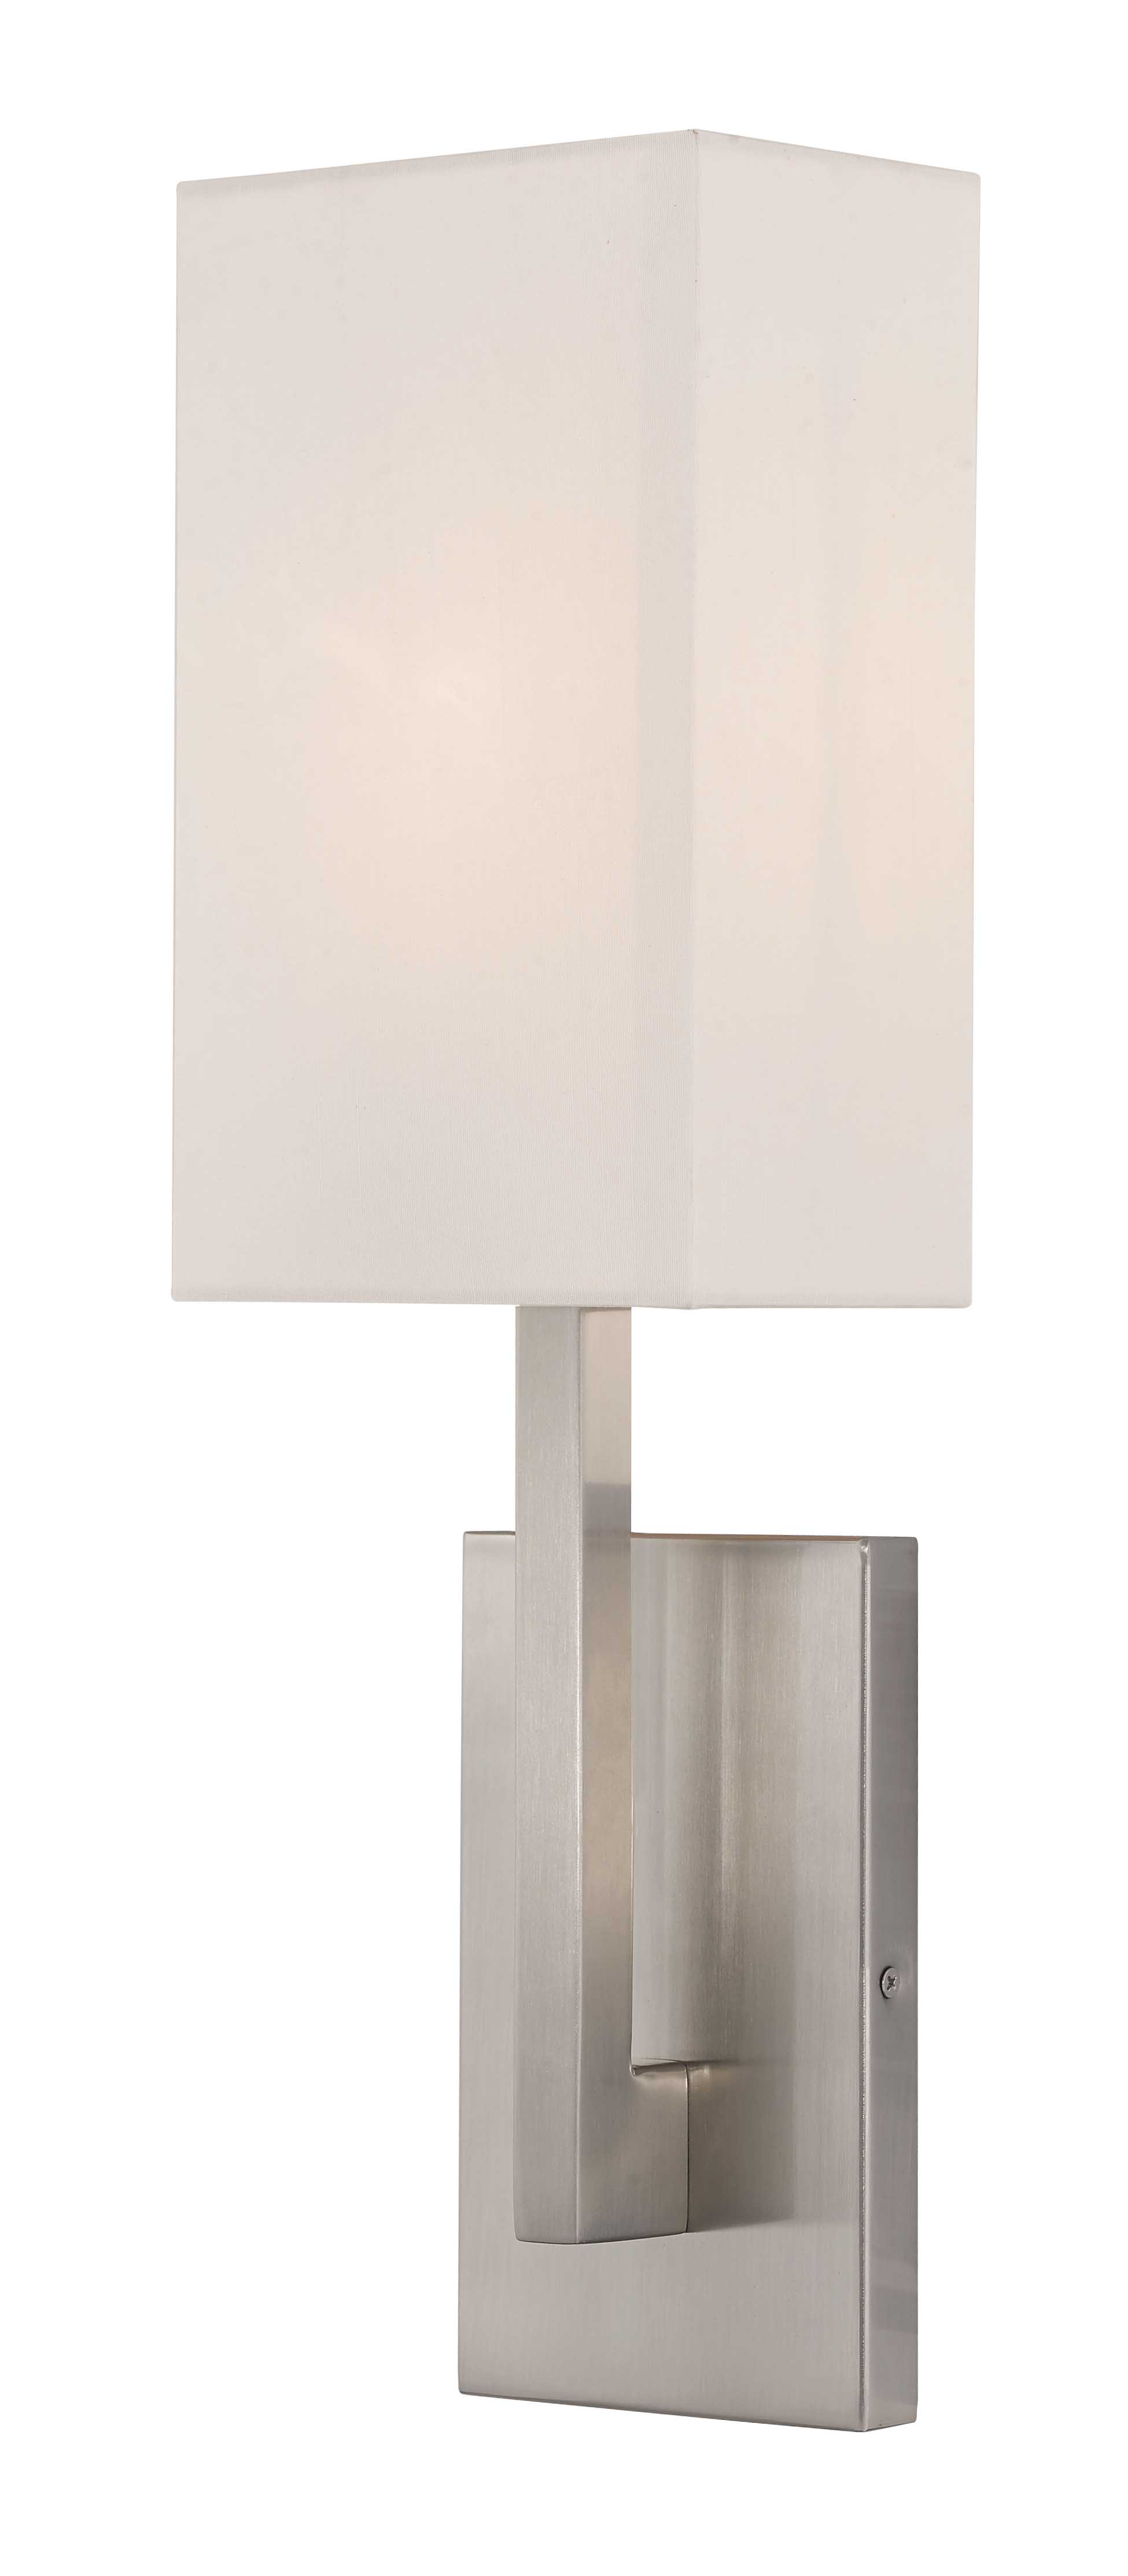 Livex Lighting 42424-07 Transitional One Light Wall Sconce from Hayworth Collection in Bronze/Dark Finish Medium